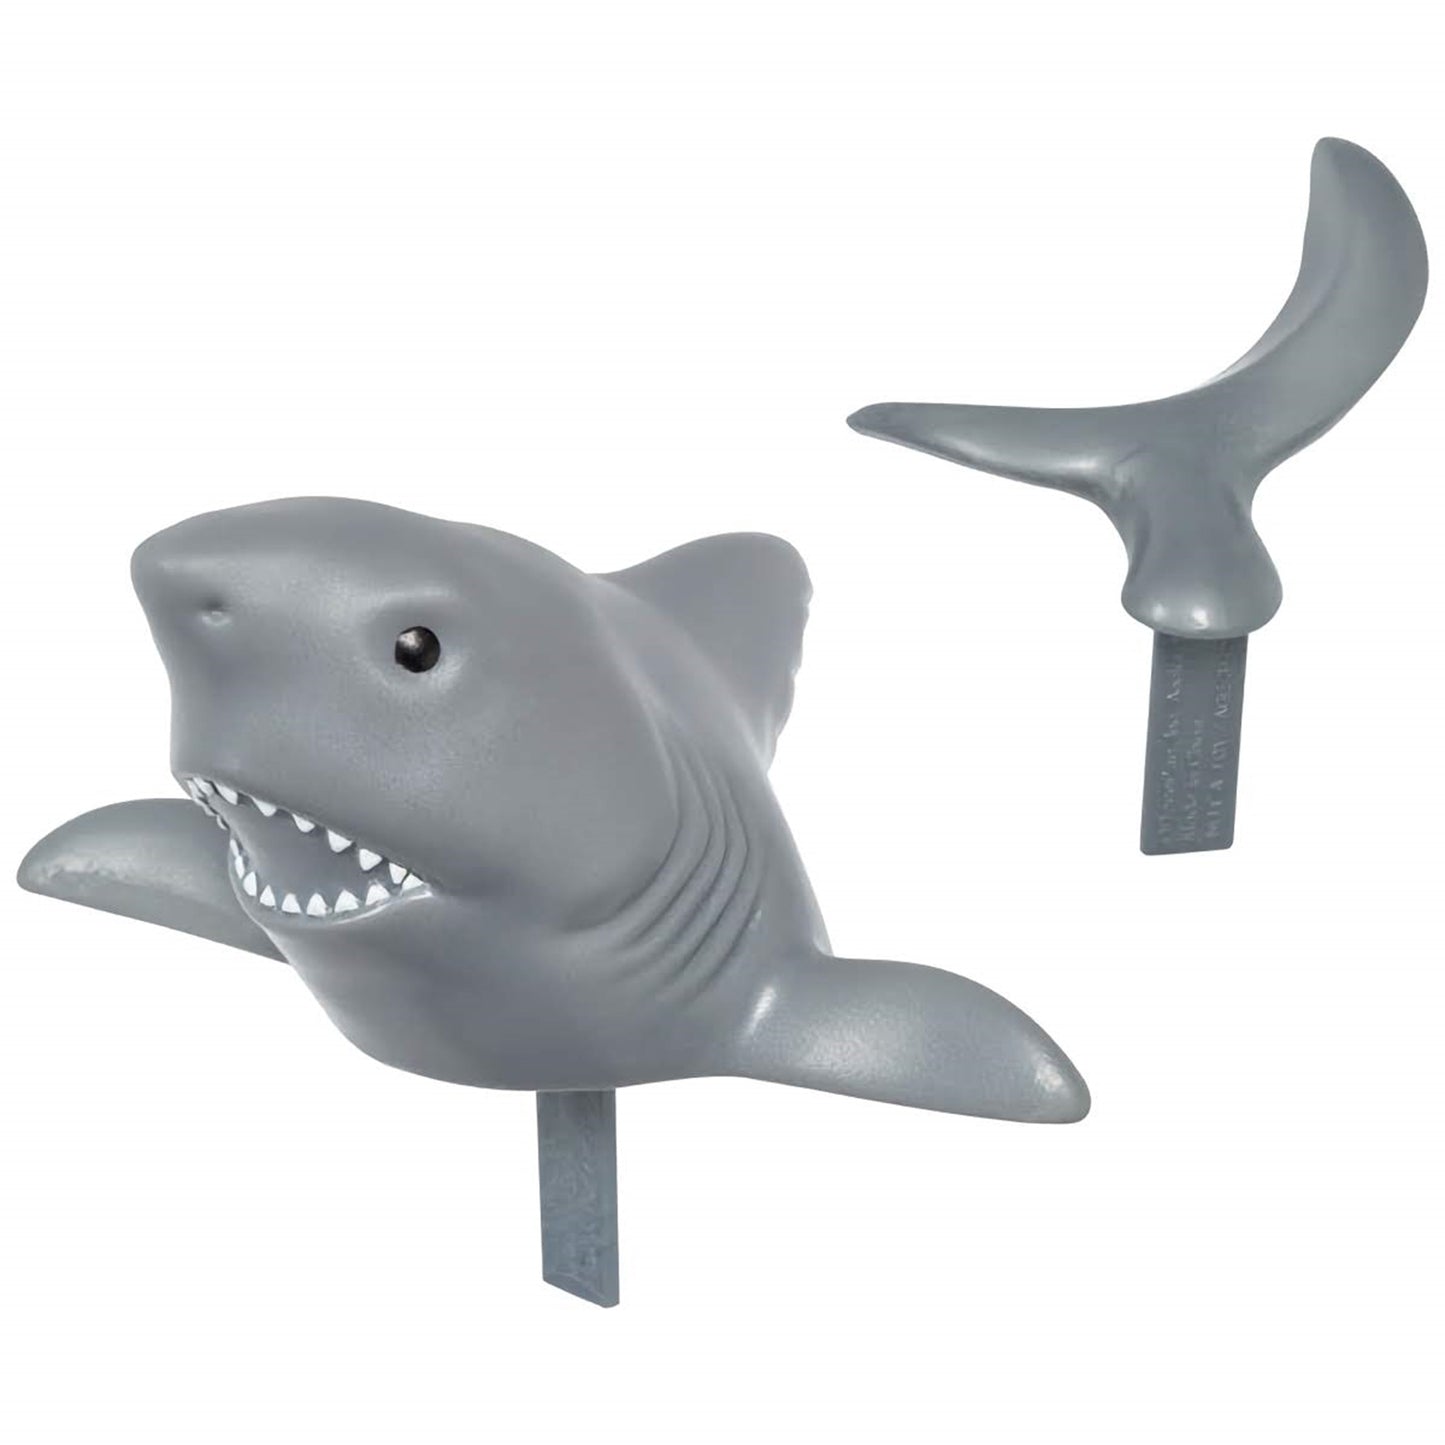 Two-piece shark cake topper set with a detailed gray shark head and tail, ideal for adding a dramatic touch to ocean or nautical-themed party cakes.